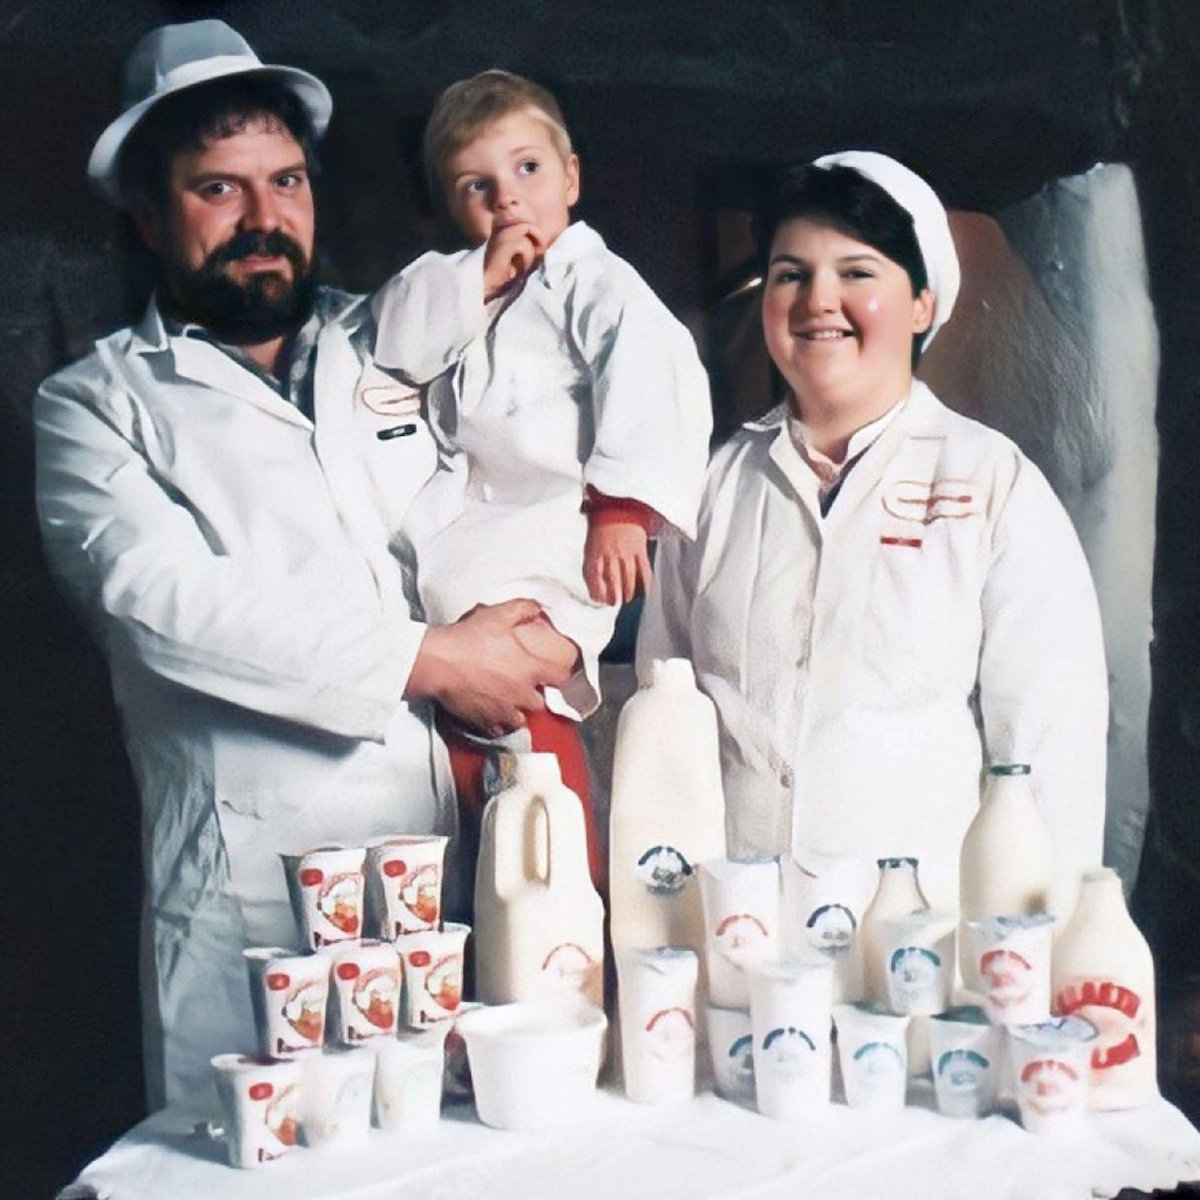 Today is the beginning of Enterprise week. It’s a week designed to encourage potential entrepreneurs, especially young people to start their own business. Gareth & Falmai took the plunge nearly 40 yrs ago and haven’t looked back! #familybusiness #Entrepreneurship